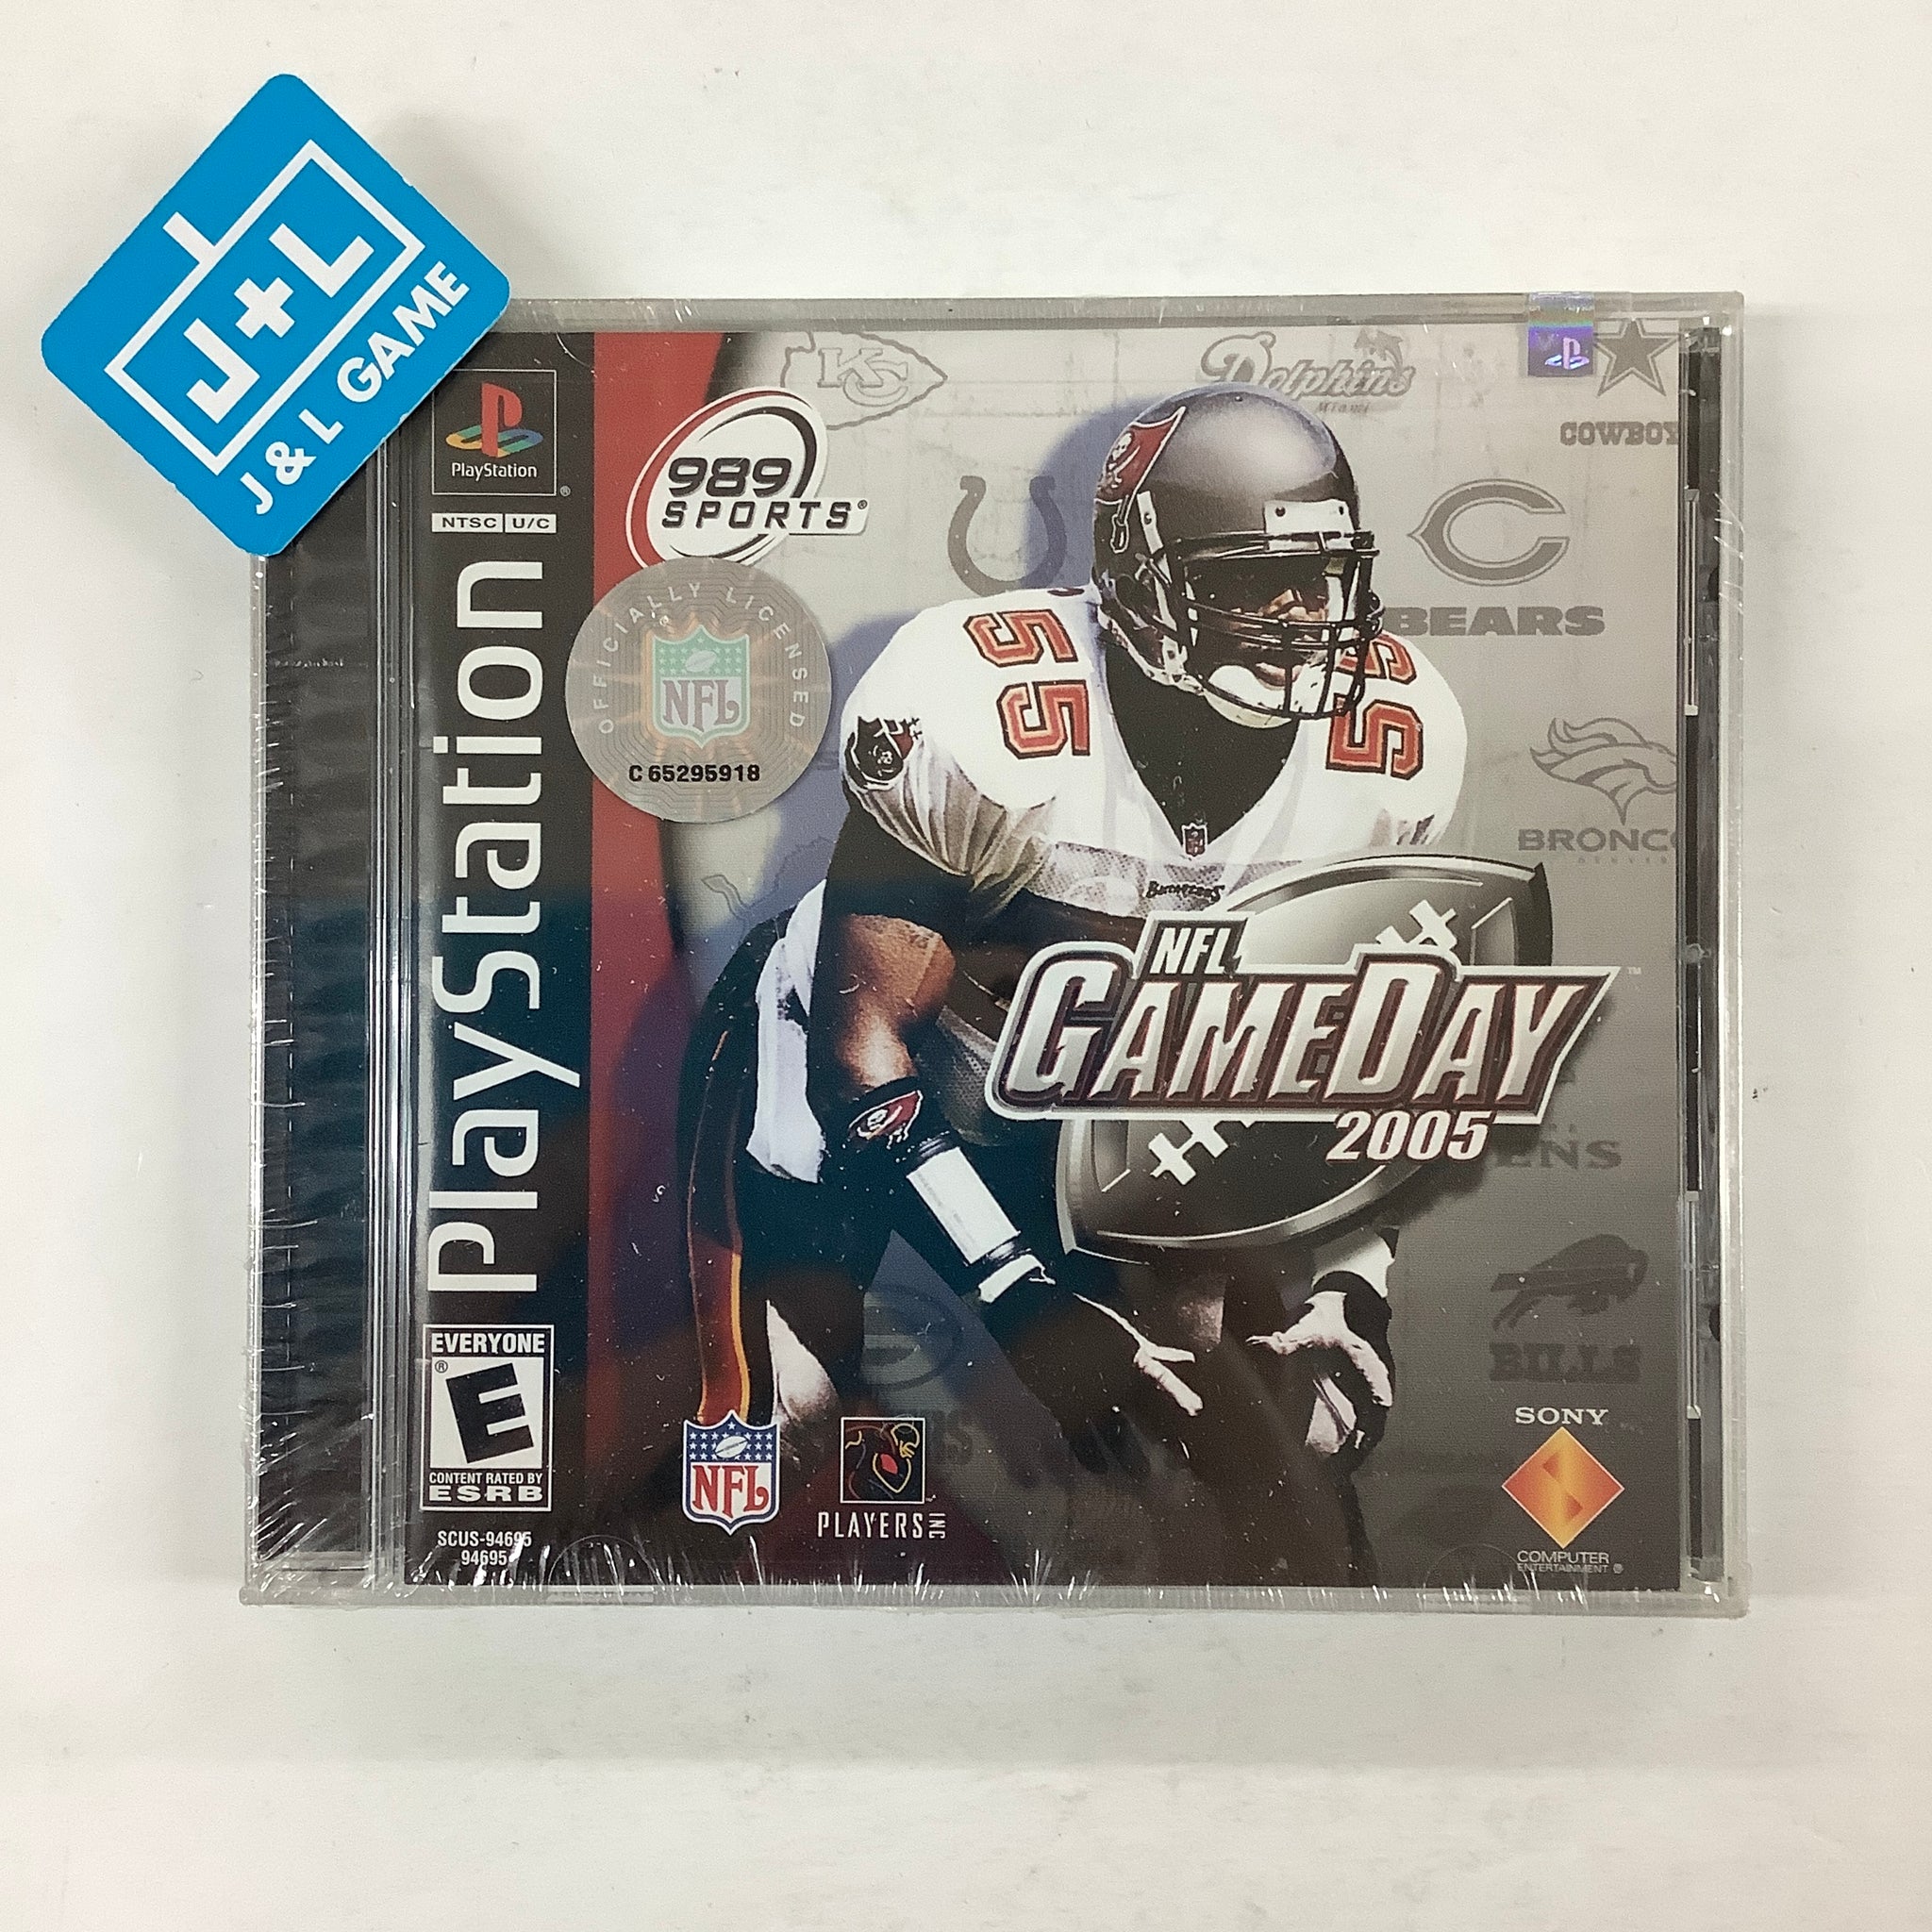 NFL GameDay 2005 - (PS1) PlayStation 1 – J&L Video Games New York City